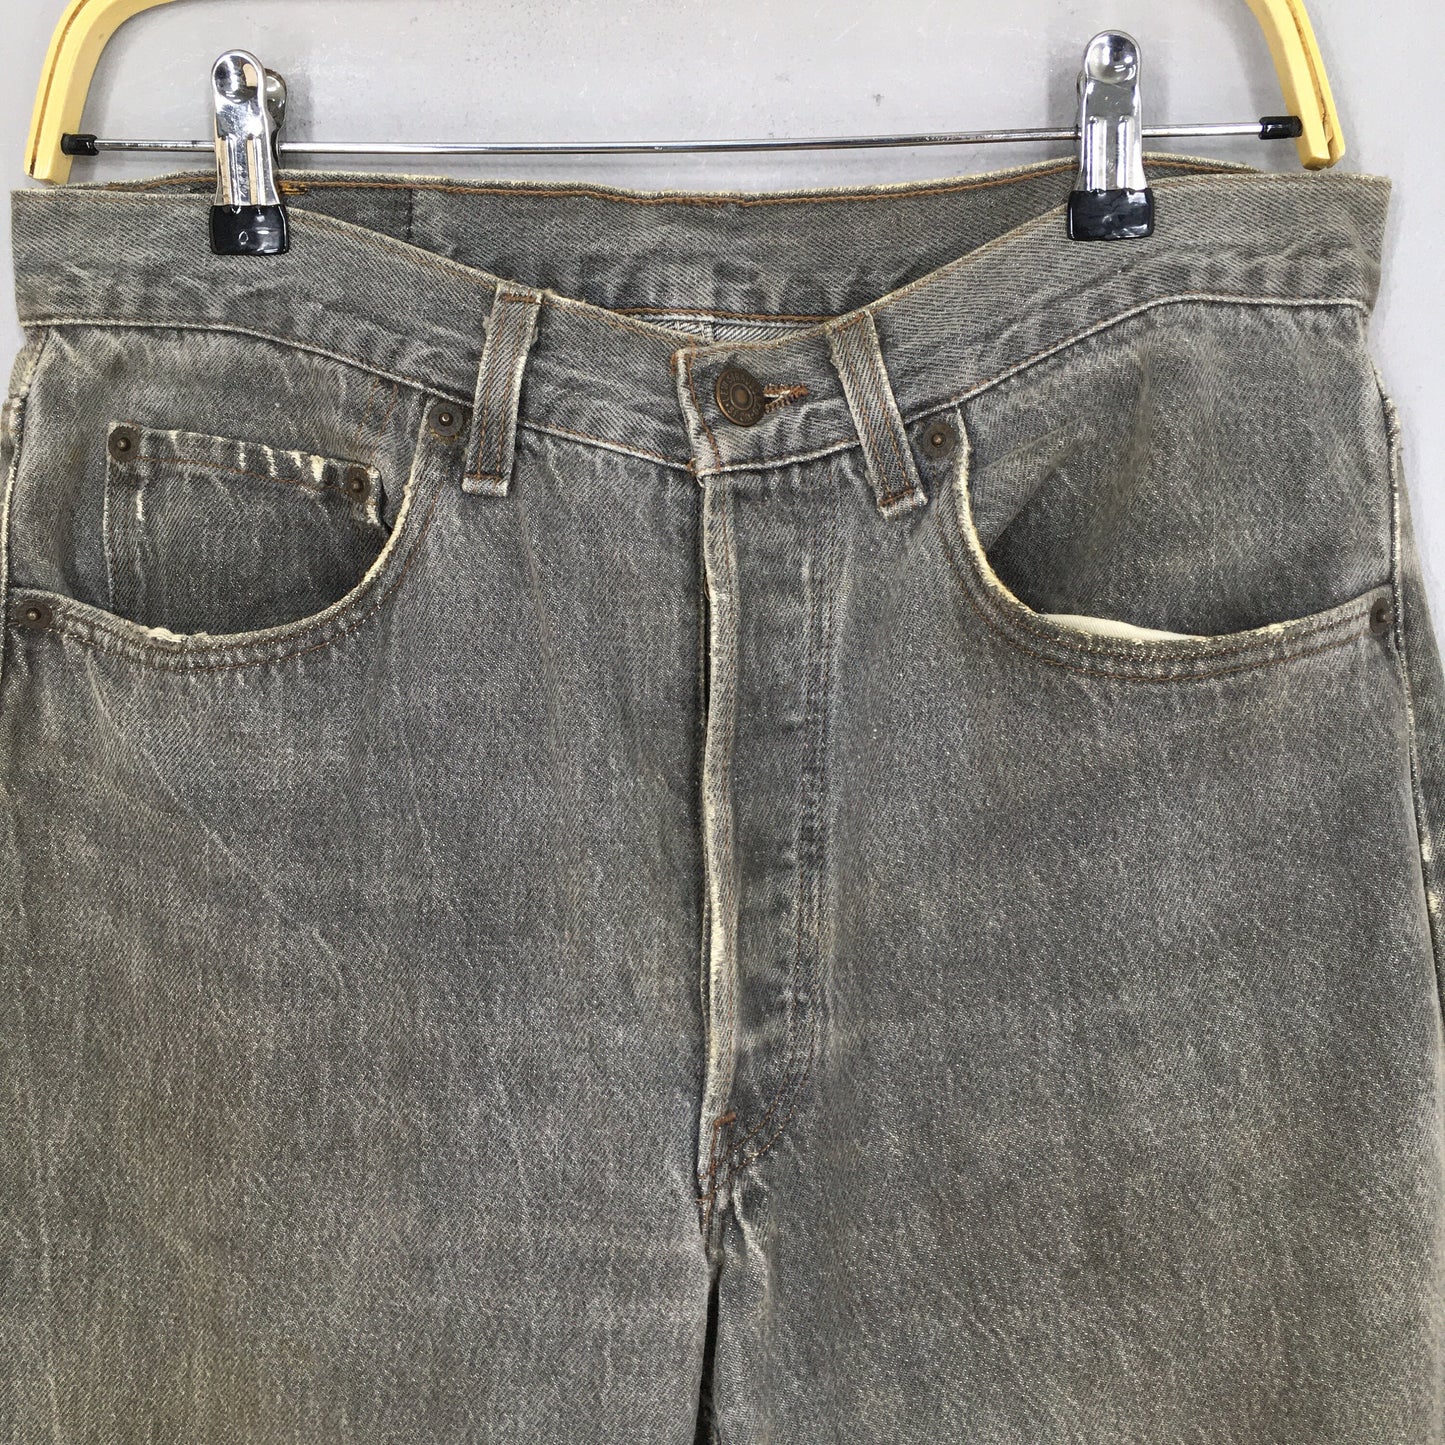 Levi's 501 Ash Gray High Waisted Jeans Size 31x29